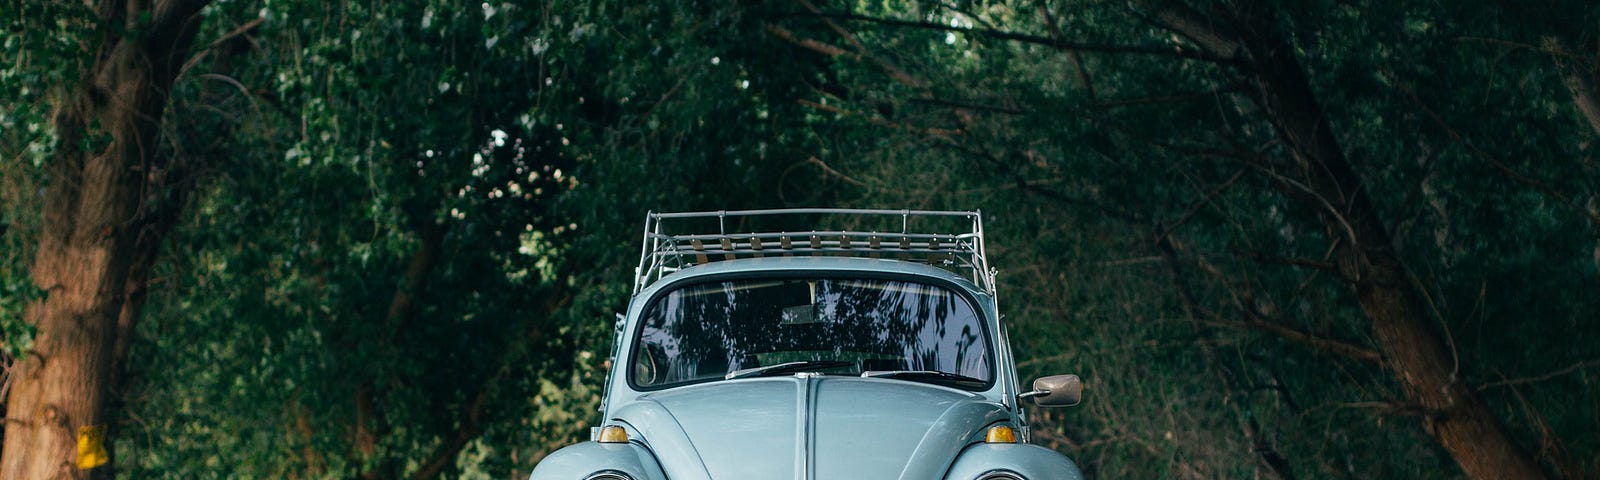 Baby-blue Volkswagen Beetle on a road with trees on either side